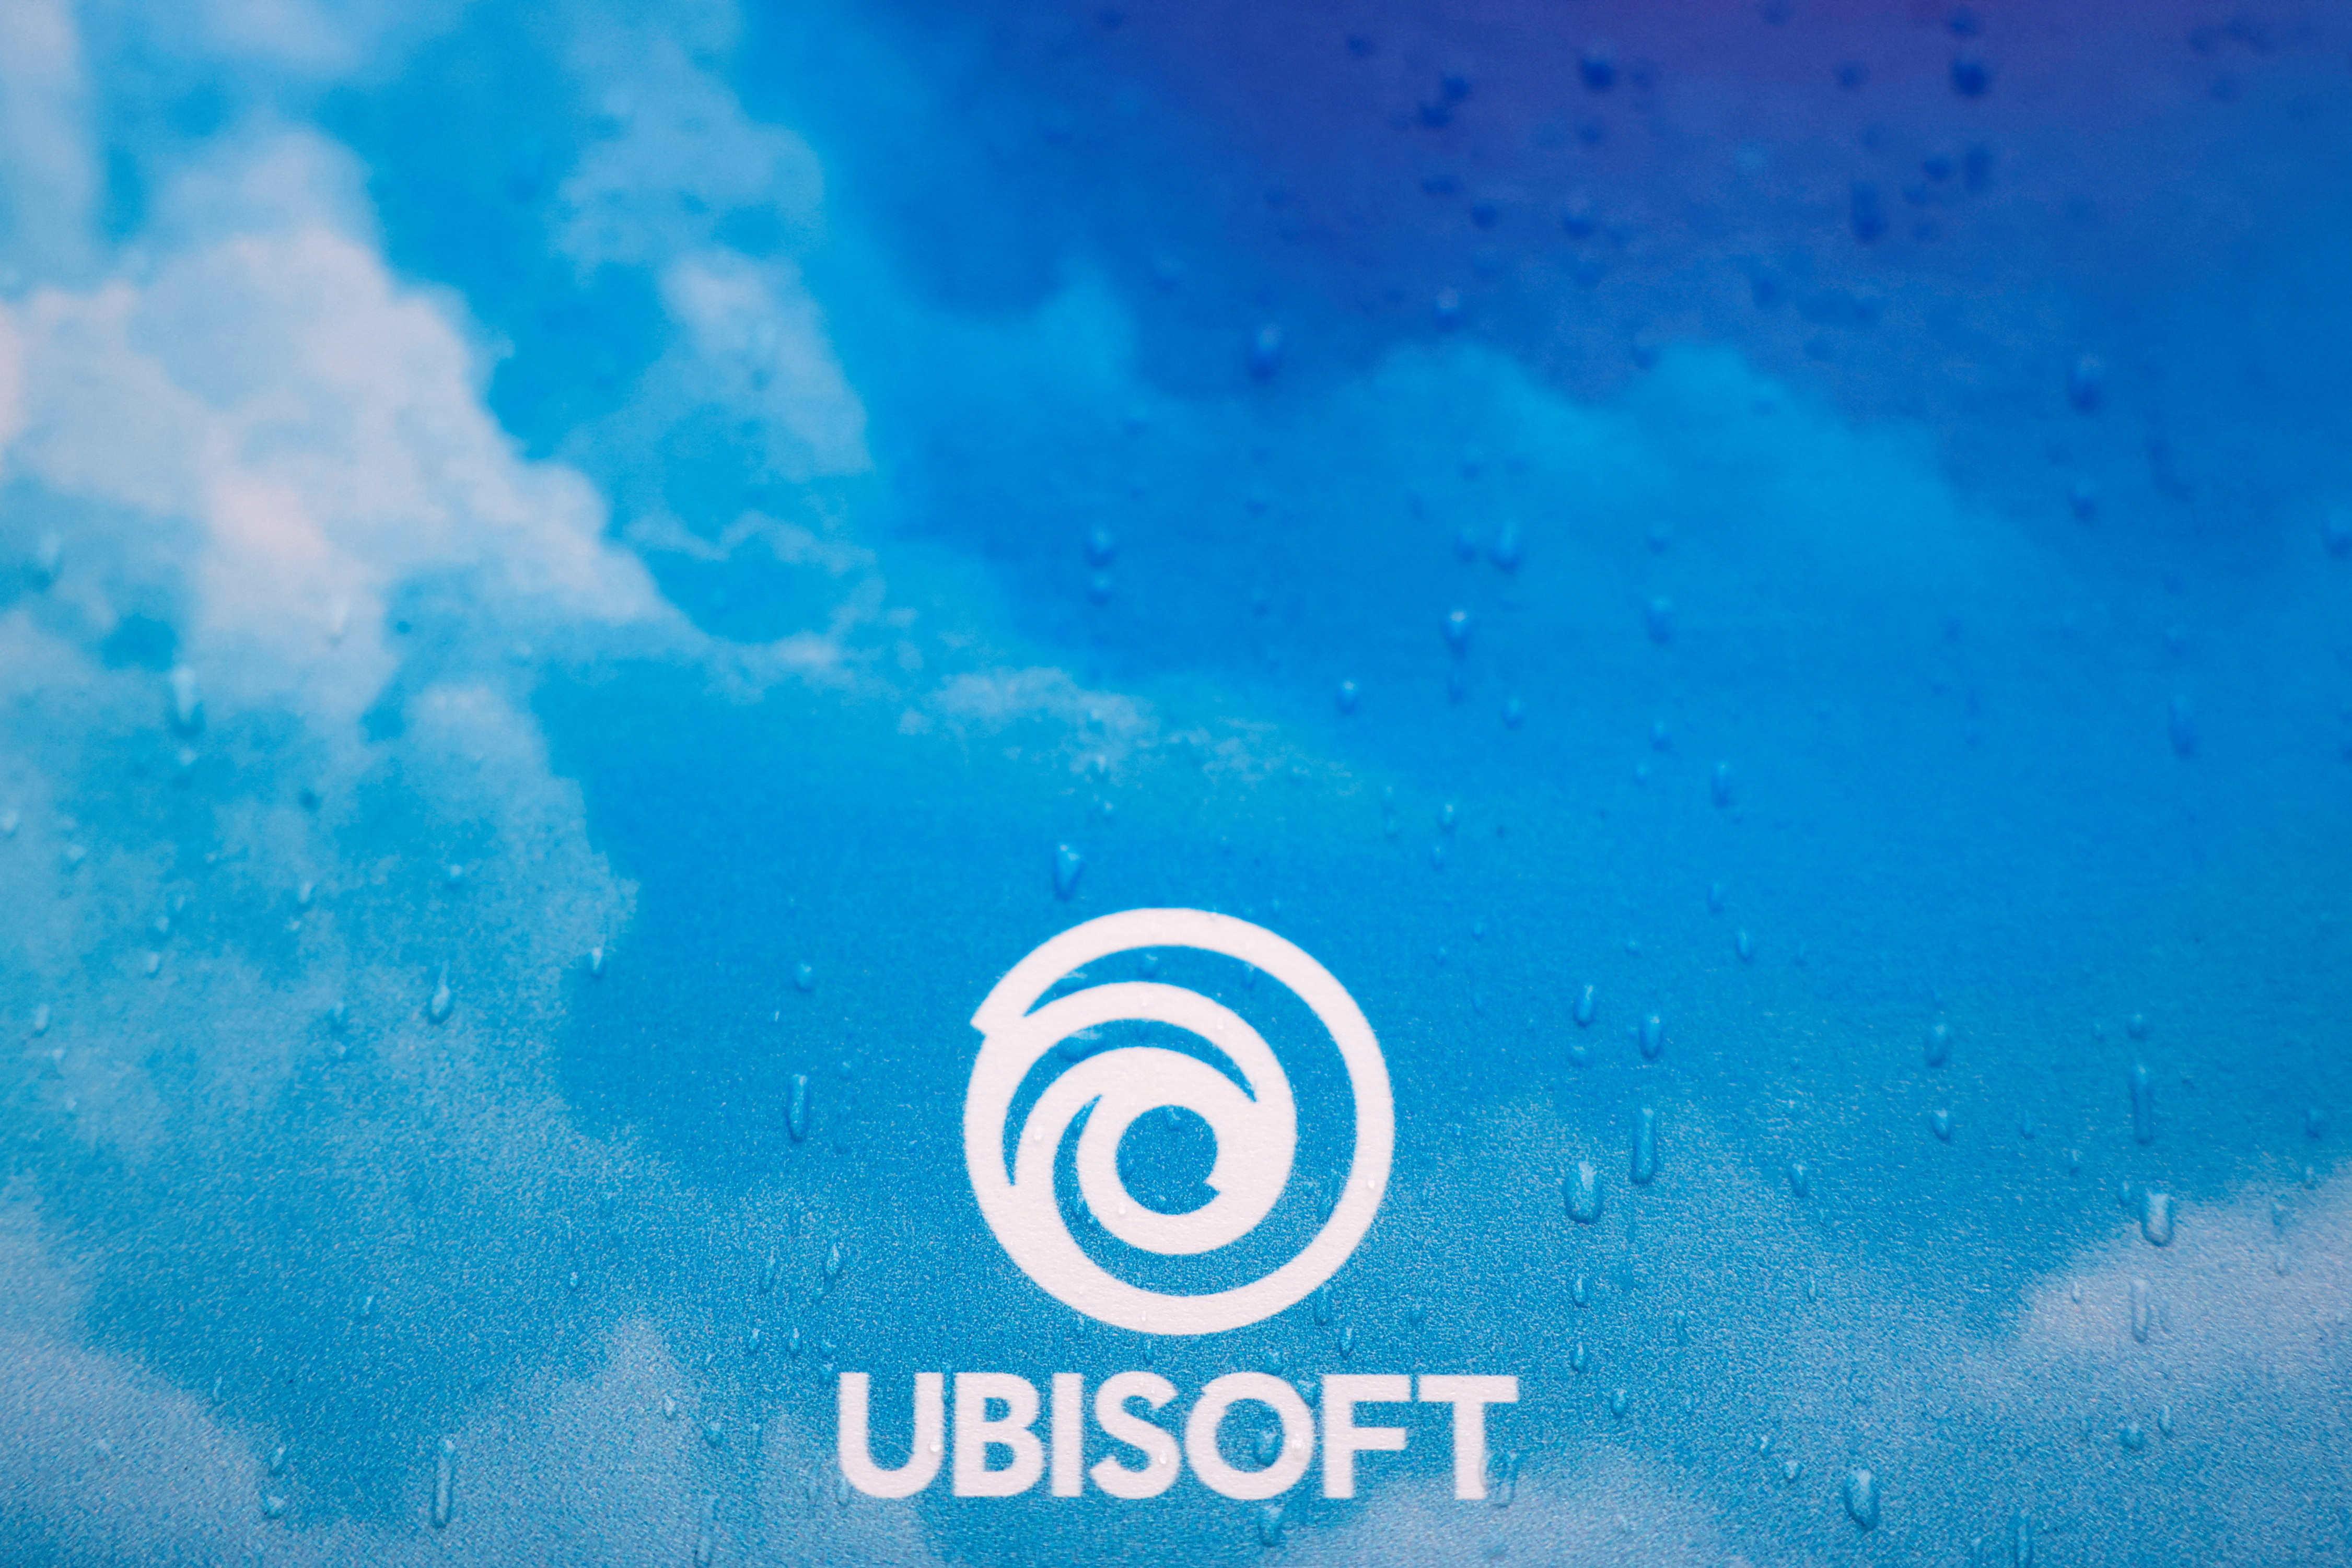 Ubisoft Support on X: Looking for information on how to claim the